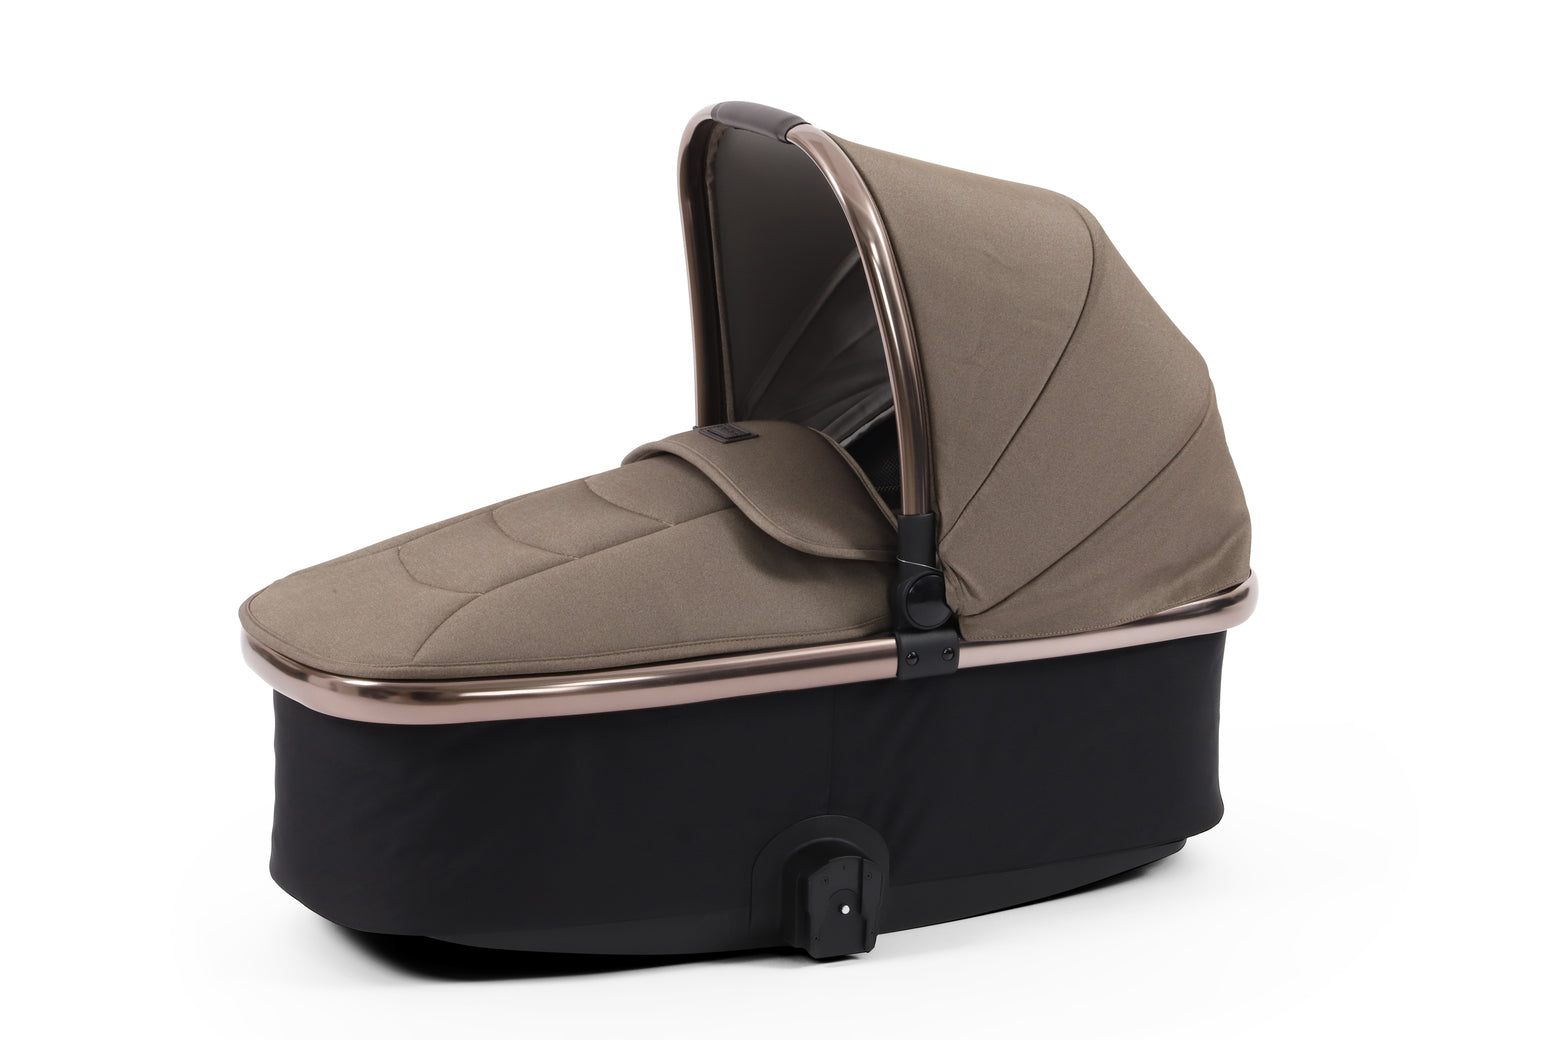 BabyStyle Oyster 3 Carrycot - Mink - For Your Little One